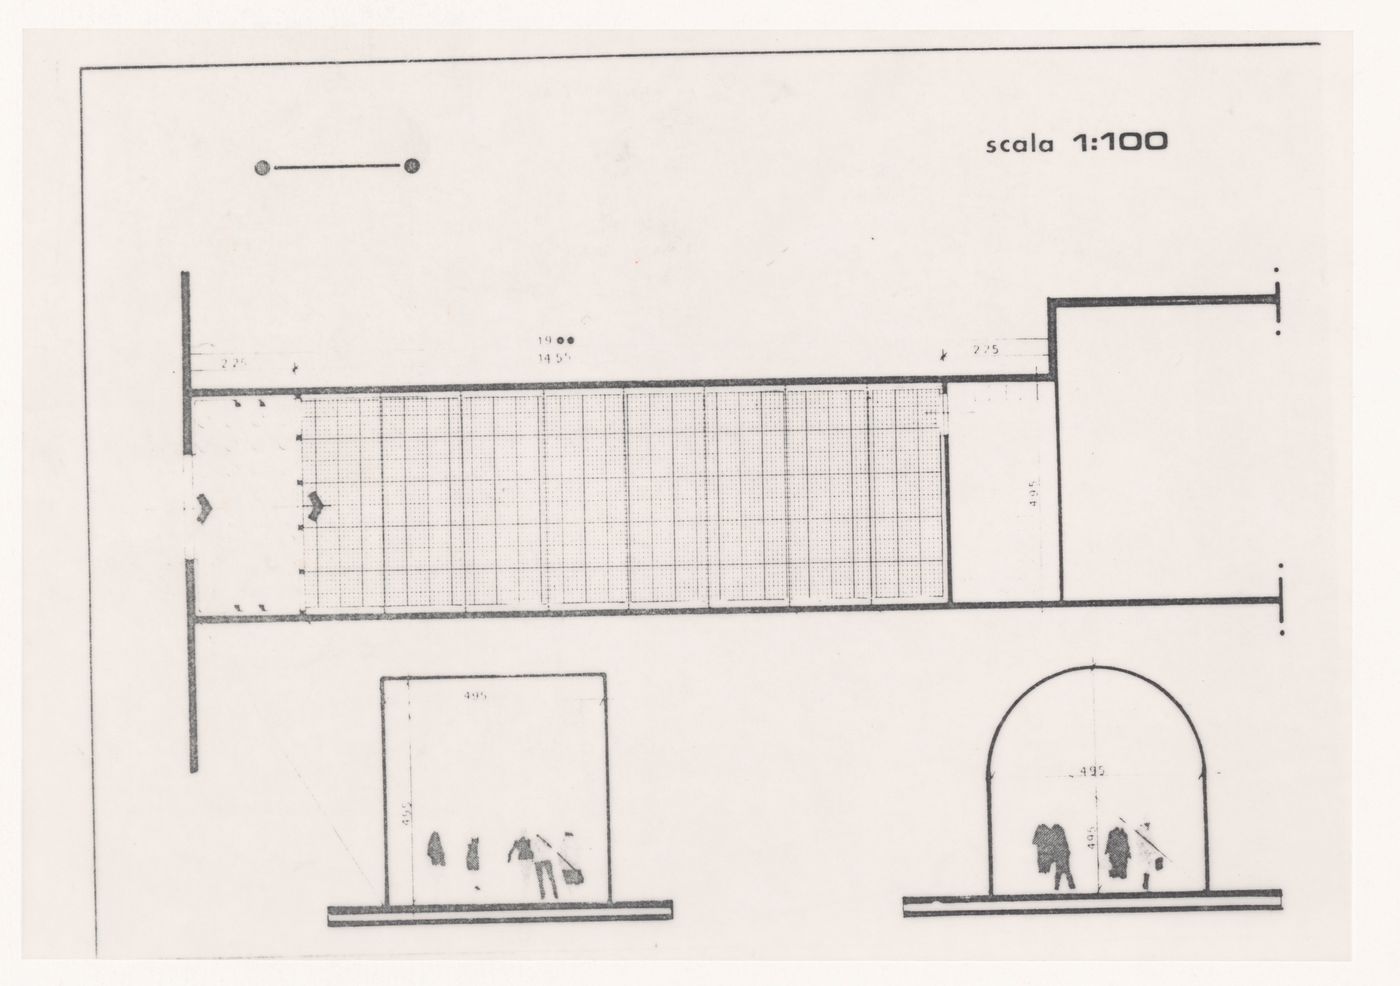 Detail from plan and cross sections for Design shop, Montecatini Terme, Pistoia, Italy